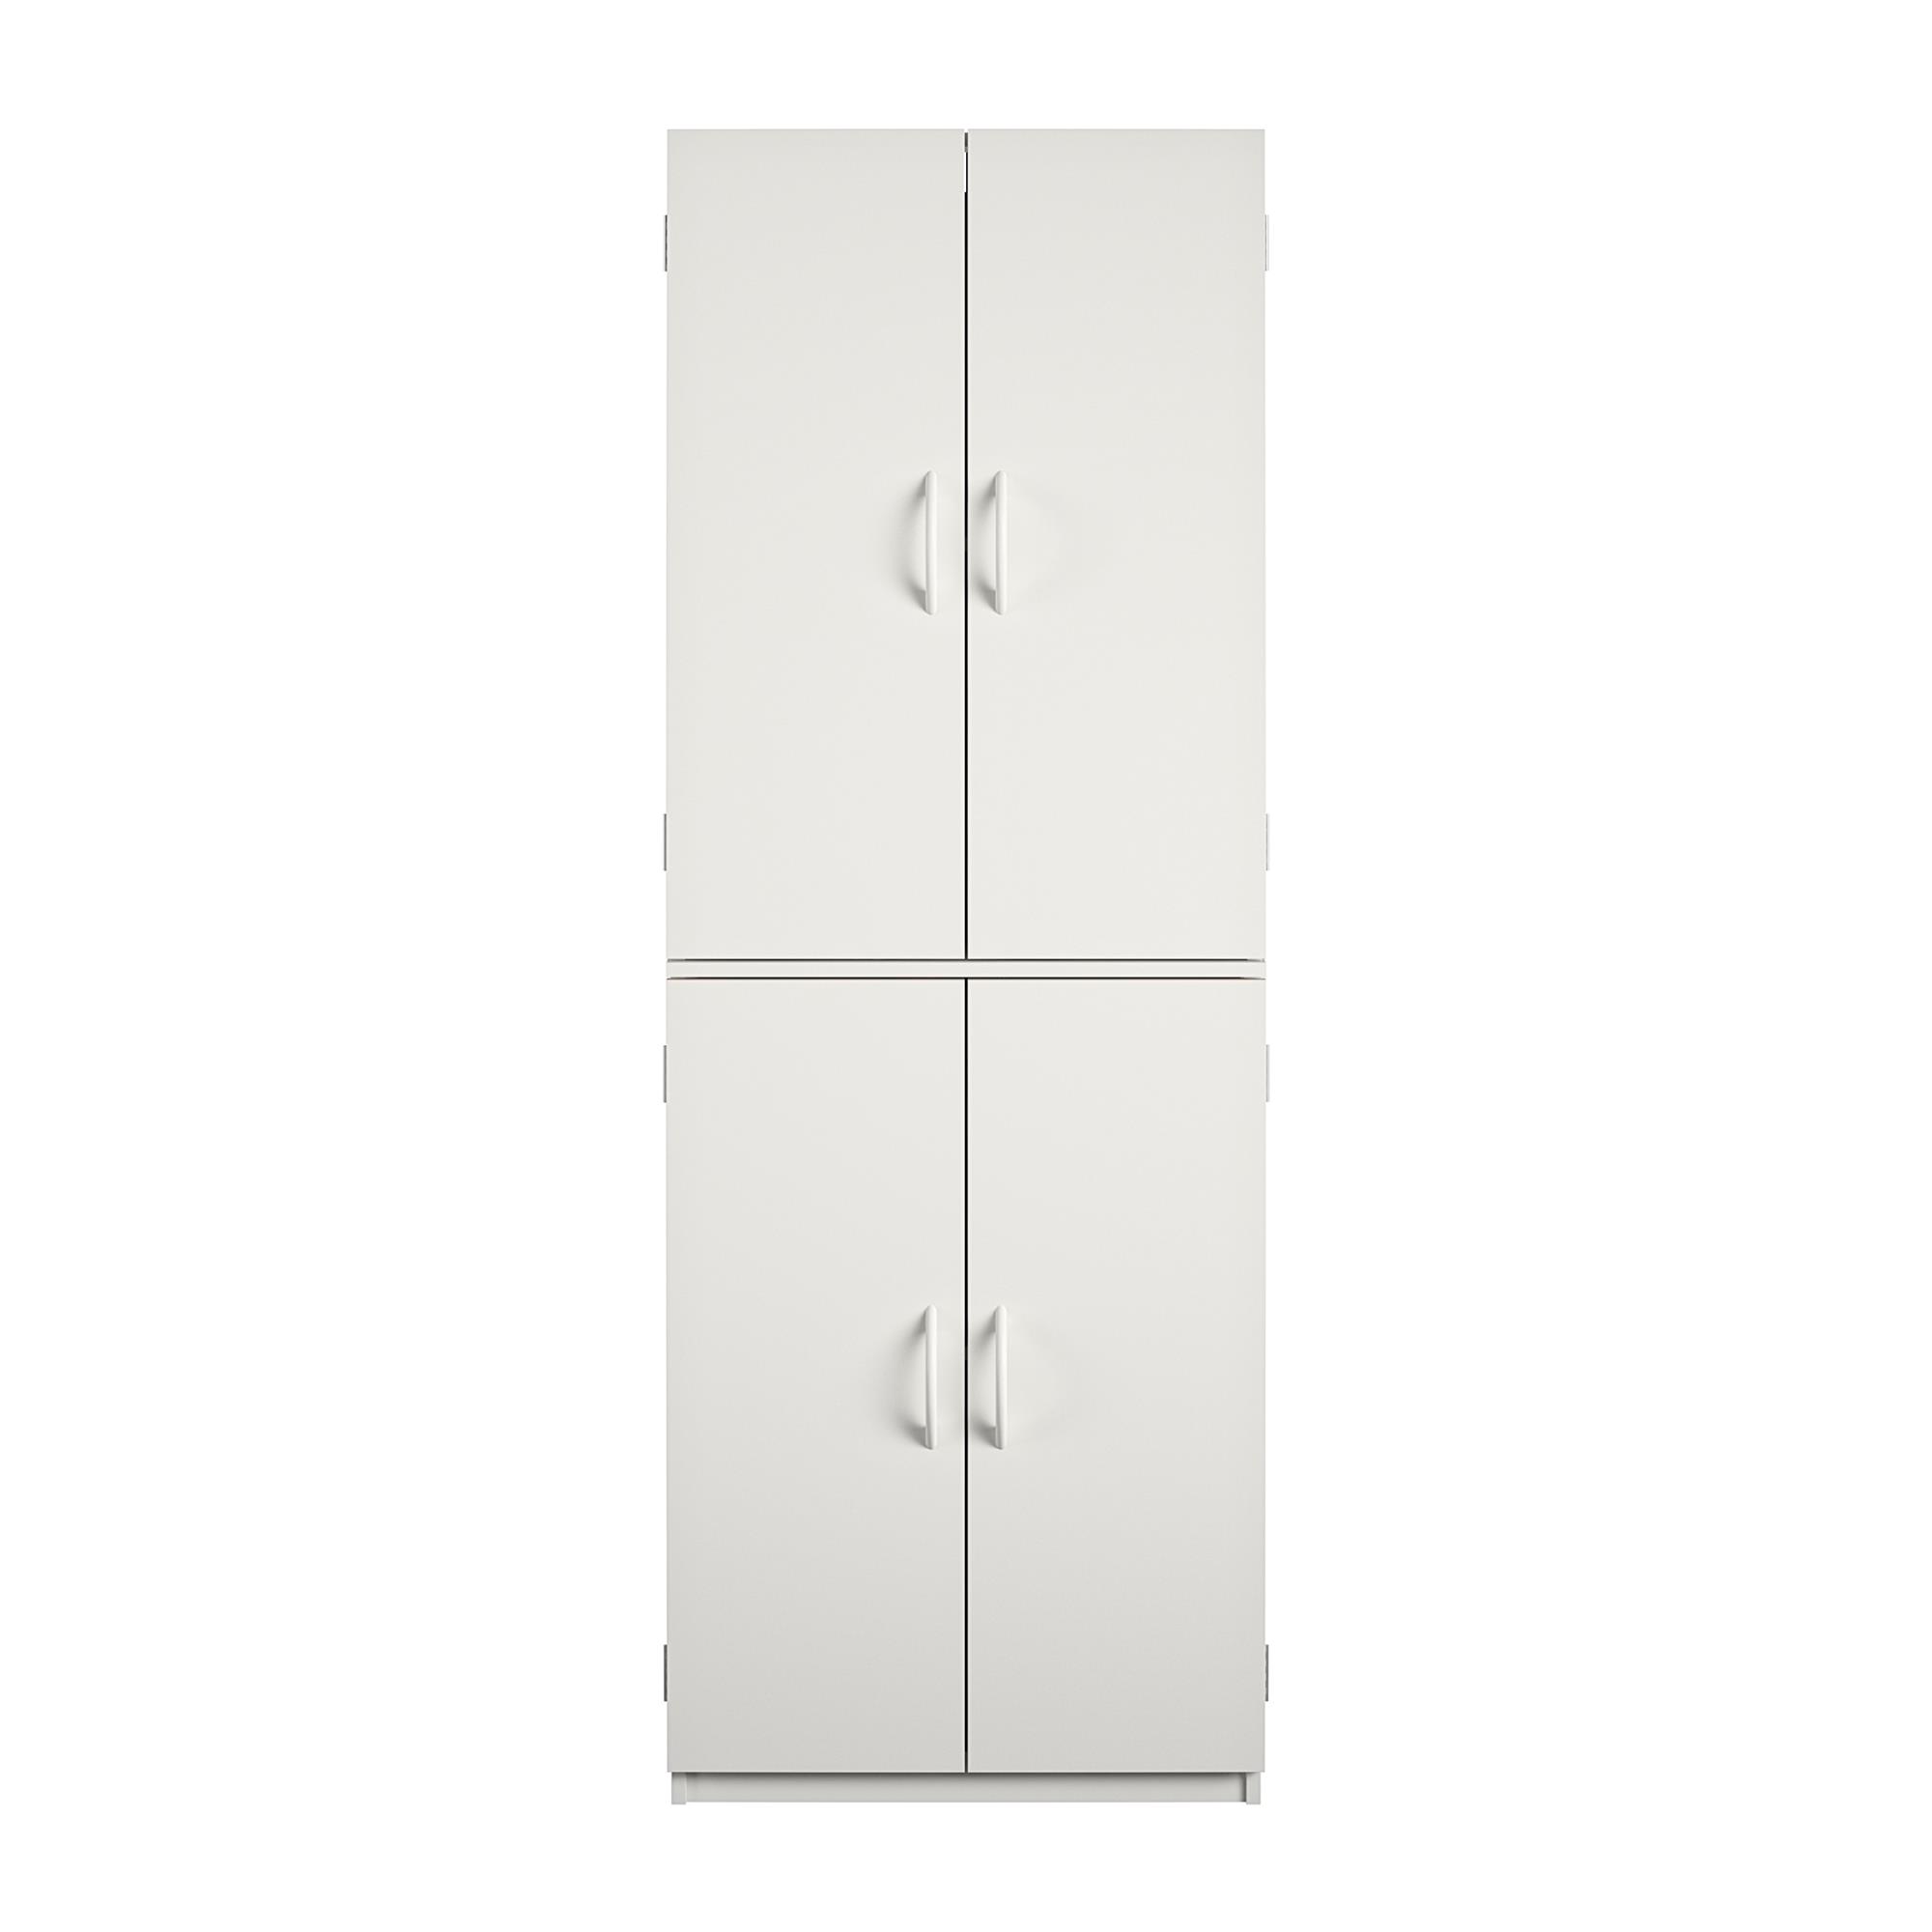 Mainstays 4-Door 5-Foot Storage Cabinet with Adjustable Shelves, White Stipple - image 5 of 17